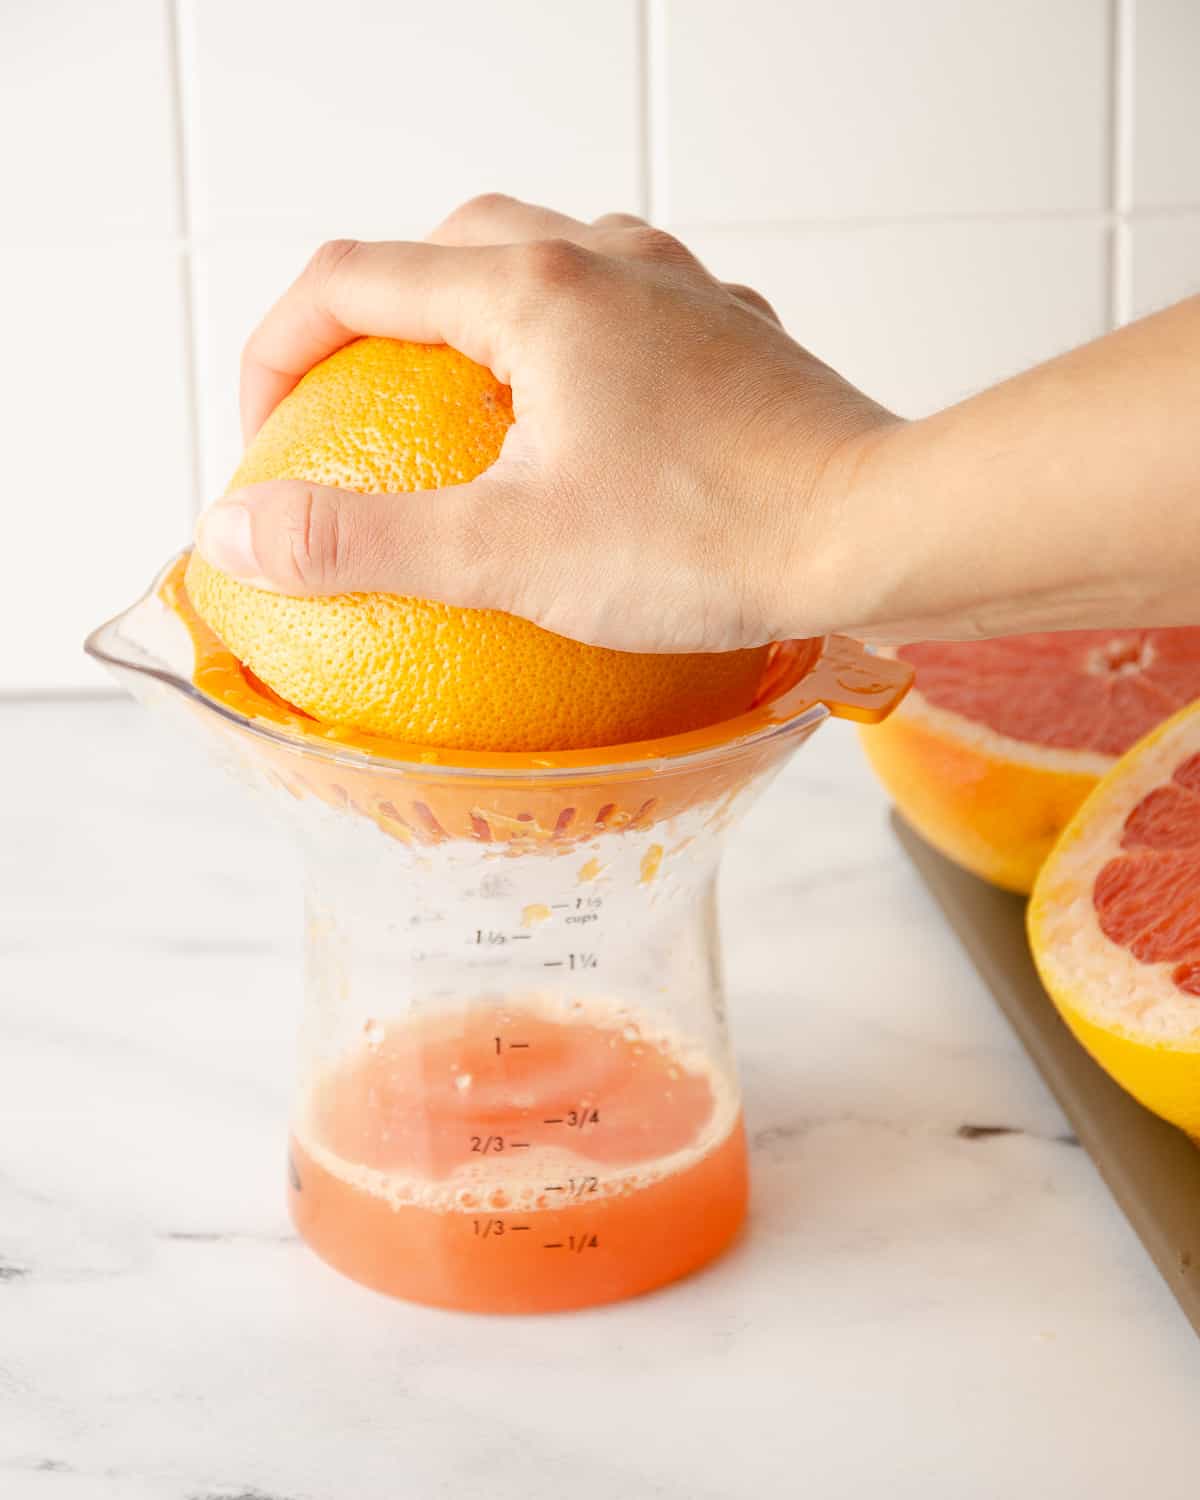 A hand squeezing a grapefruit half on a juicer.